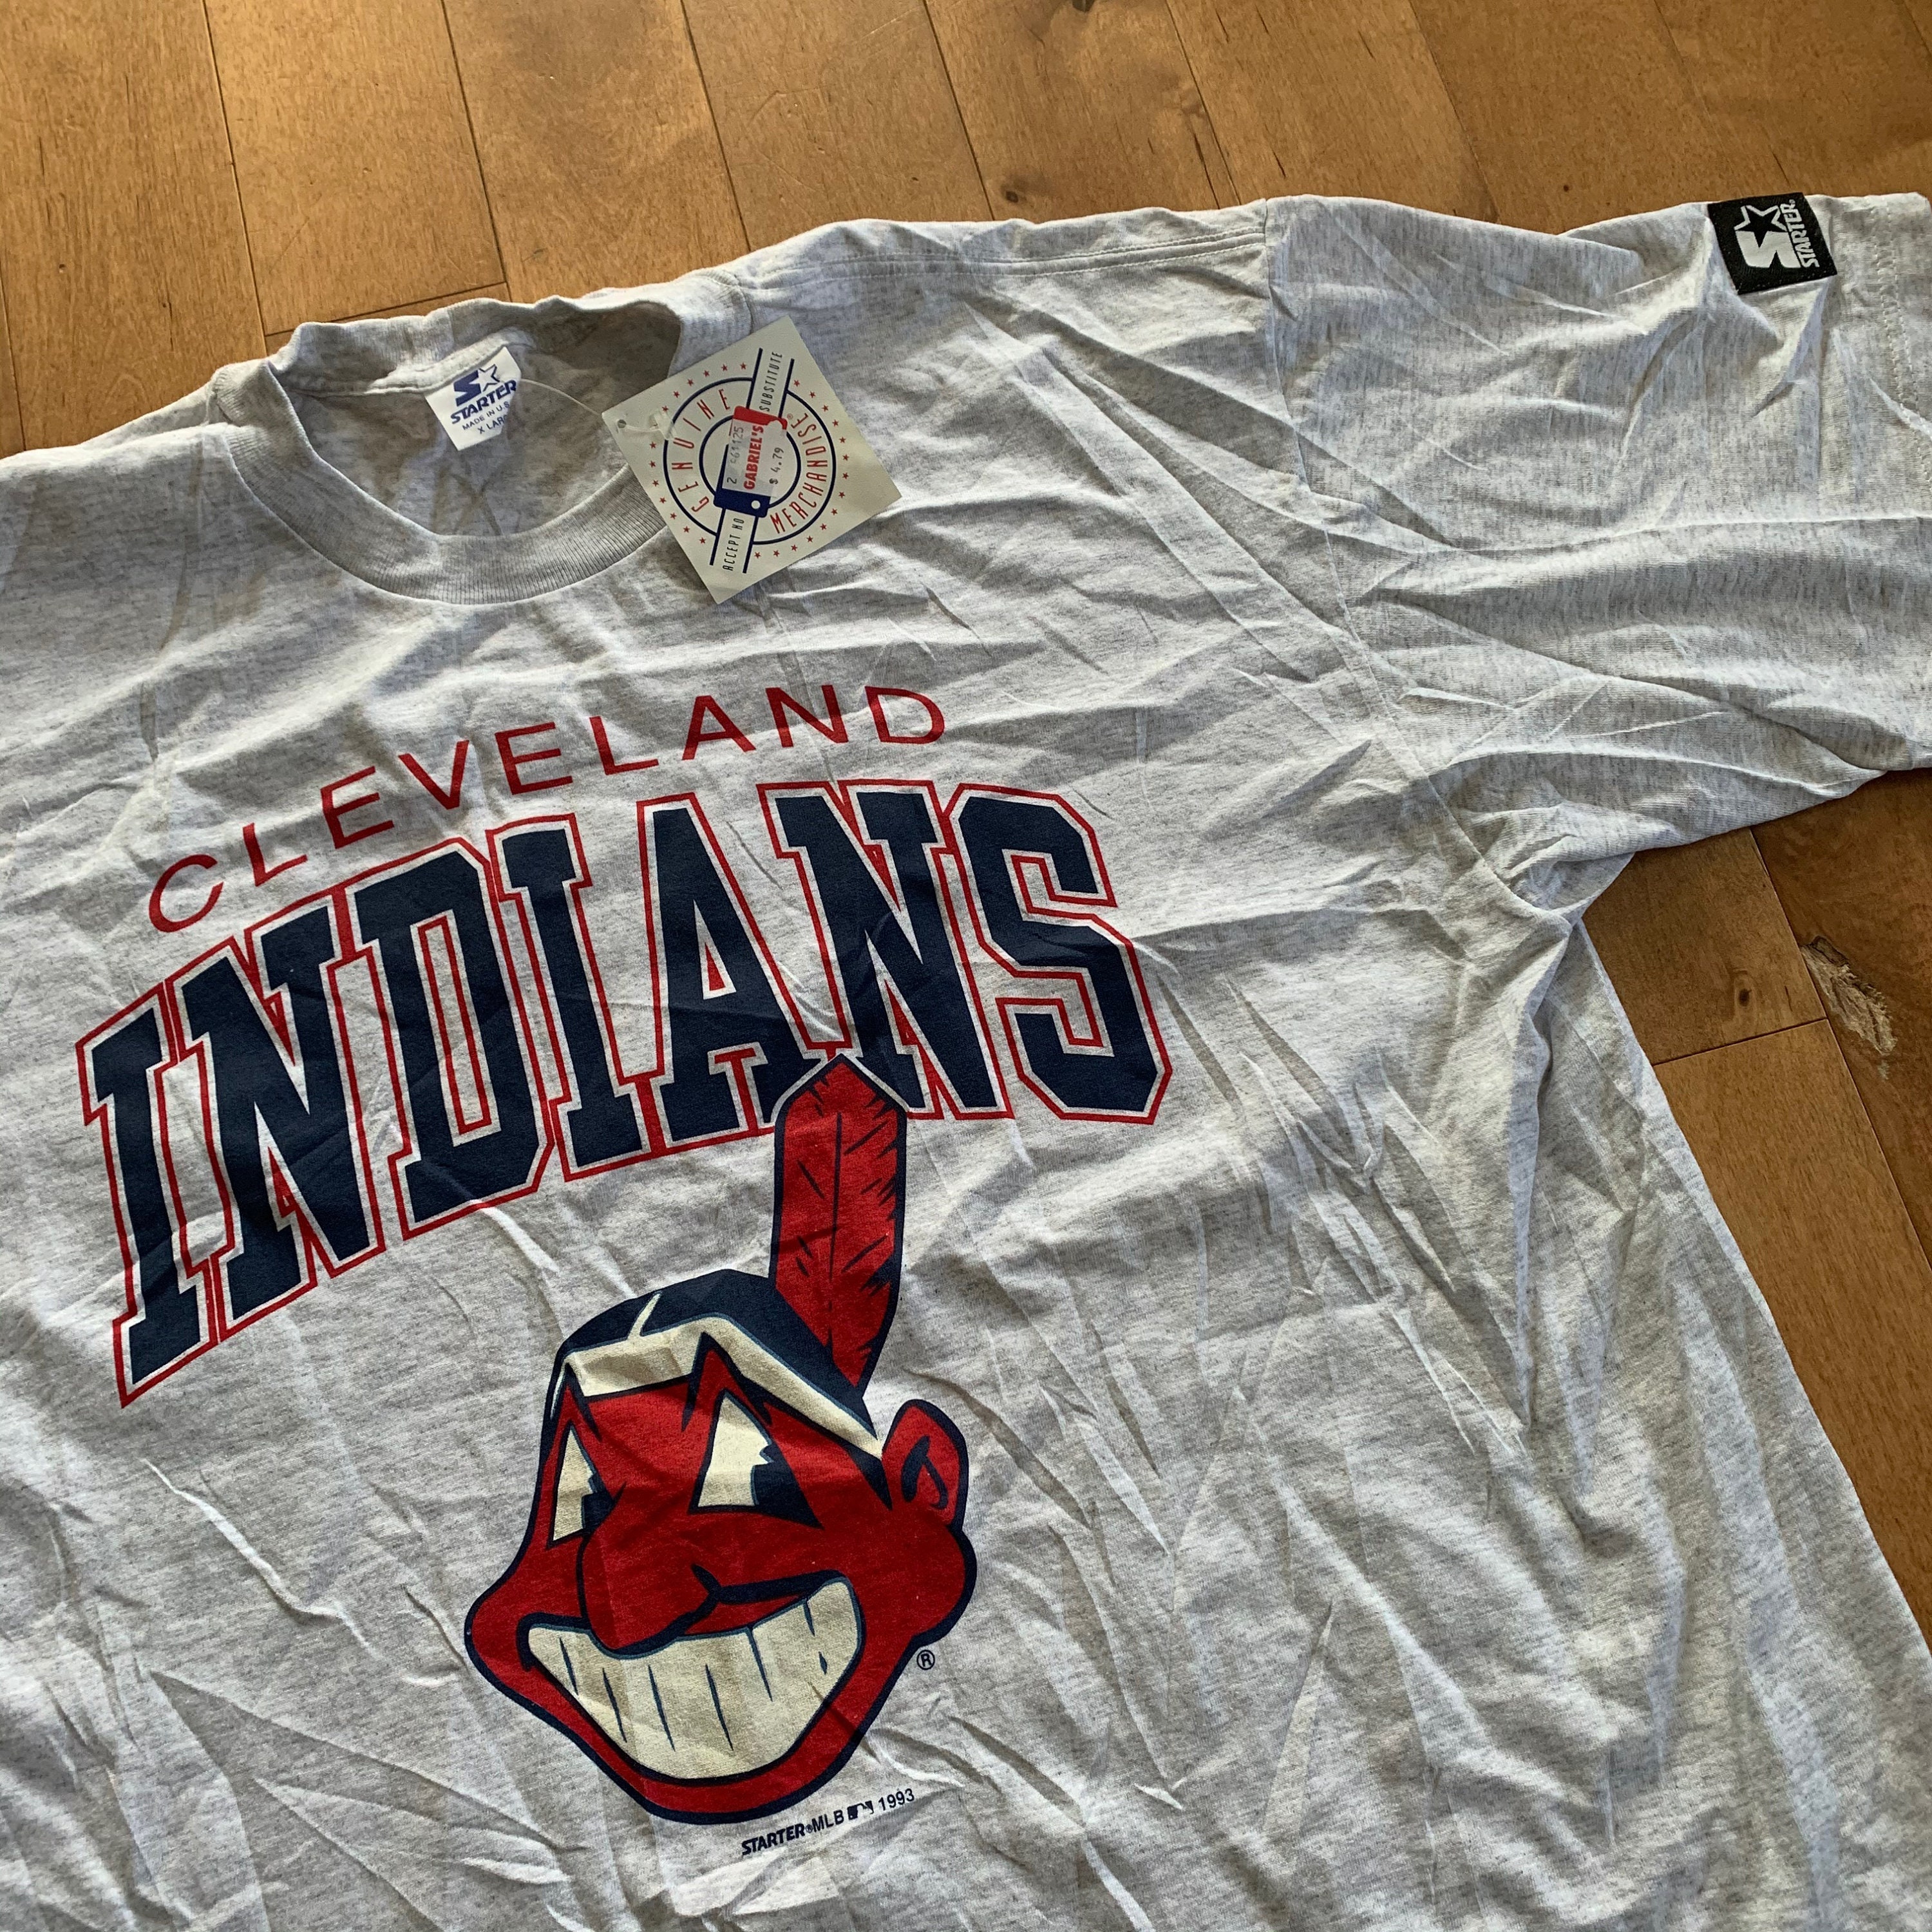 1993 Cleveland Indians Deadstock with Tags Starter T-shirt Vintage 1990s  Made in USA MLB Baseball Tee Ohio Sportswear DS